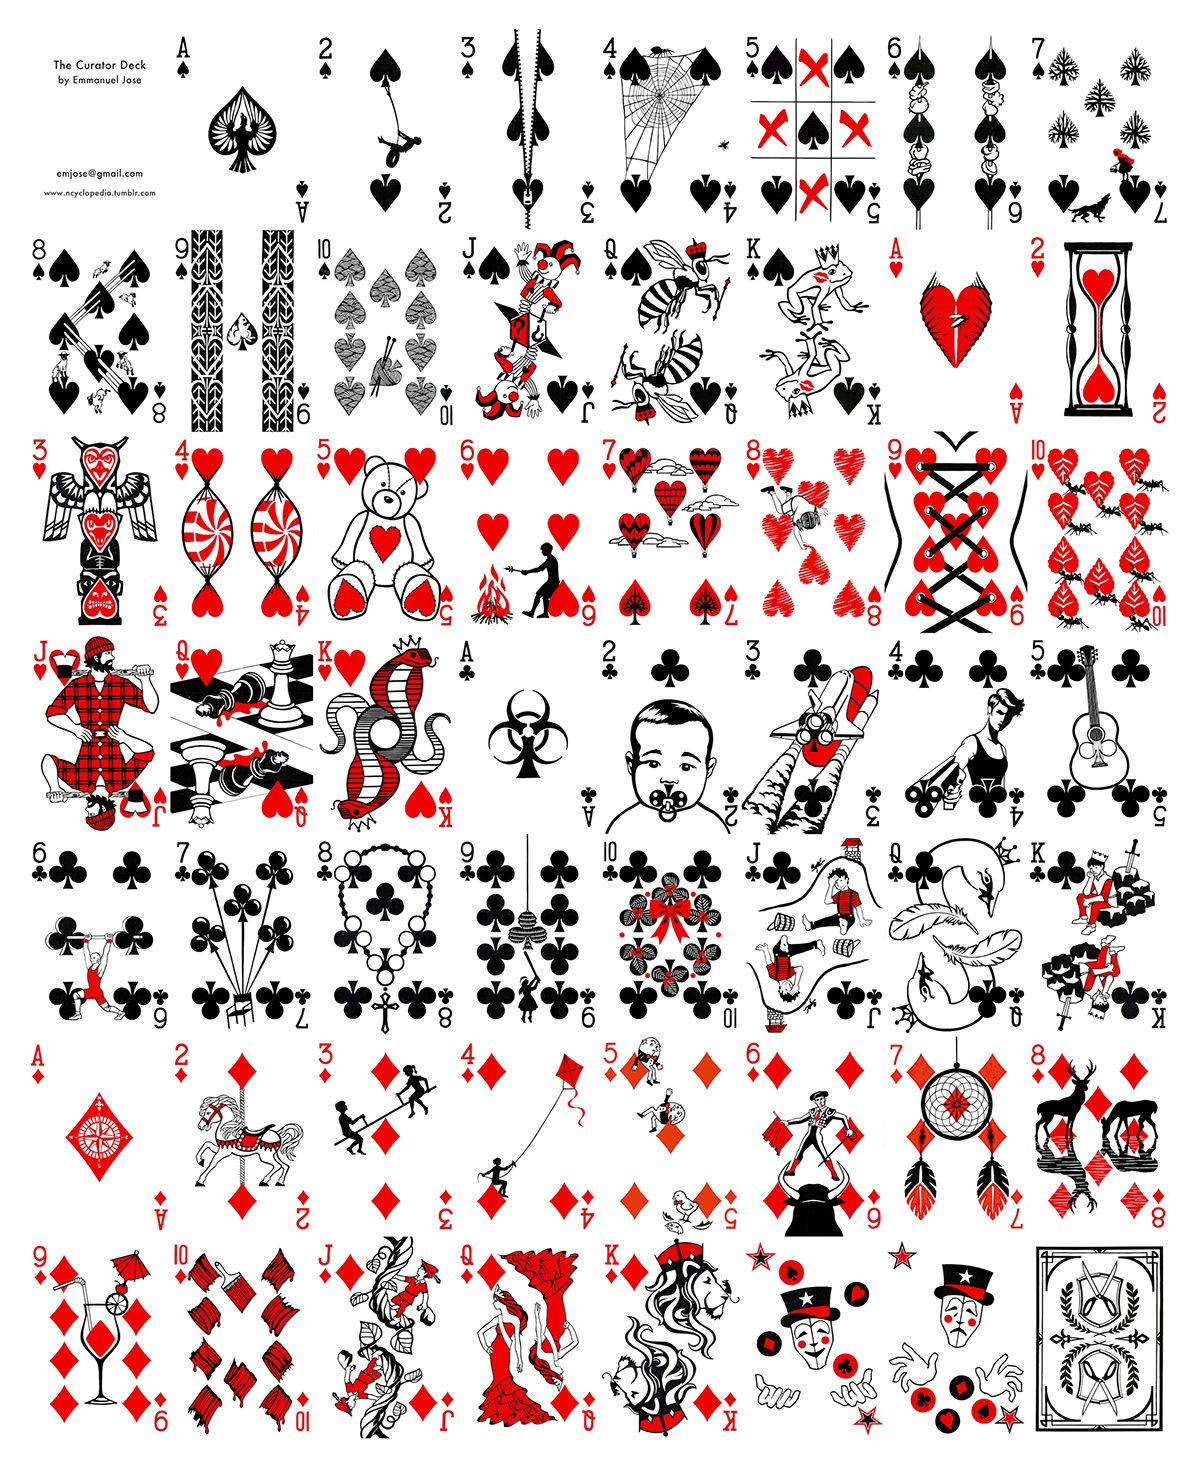 Playing Cards poker cards transformation cards deck of cards paper papercutting Paper cutting spades hearts clubs diamonds ace jack queen king cards game cardistry PIPS